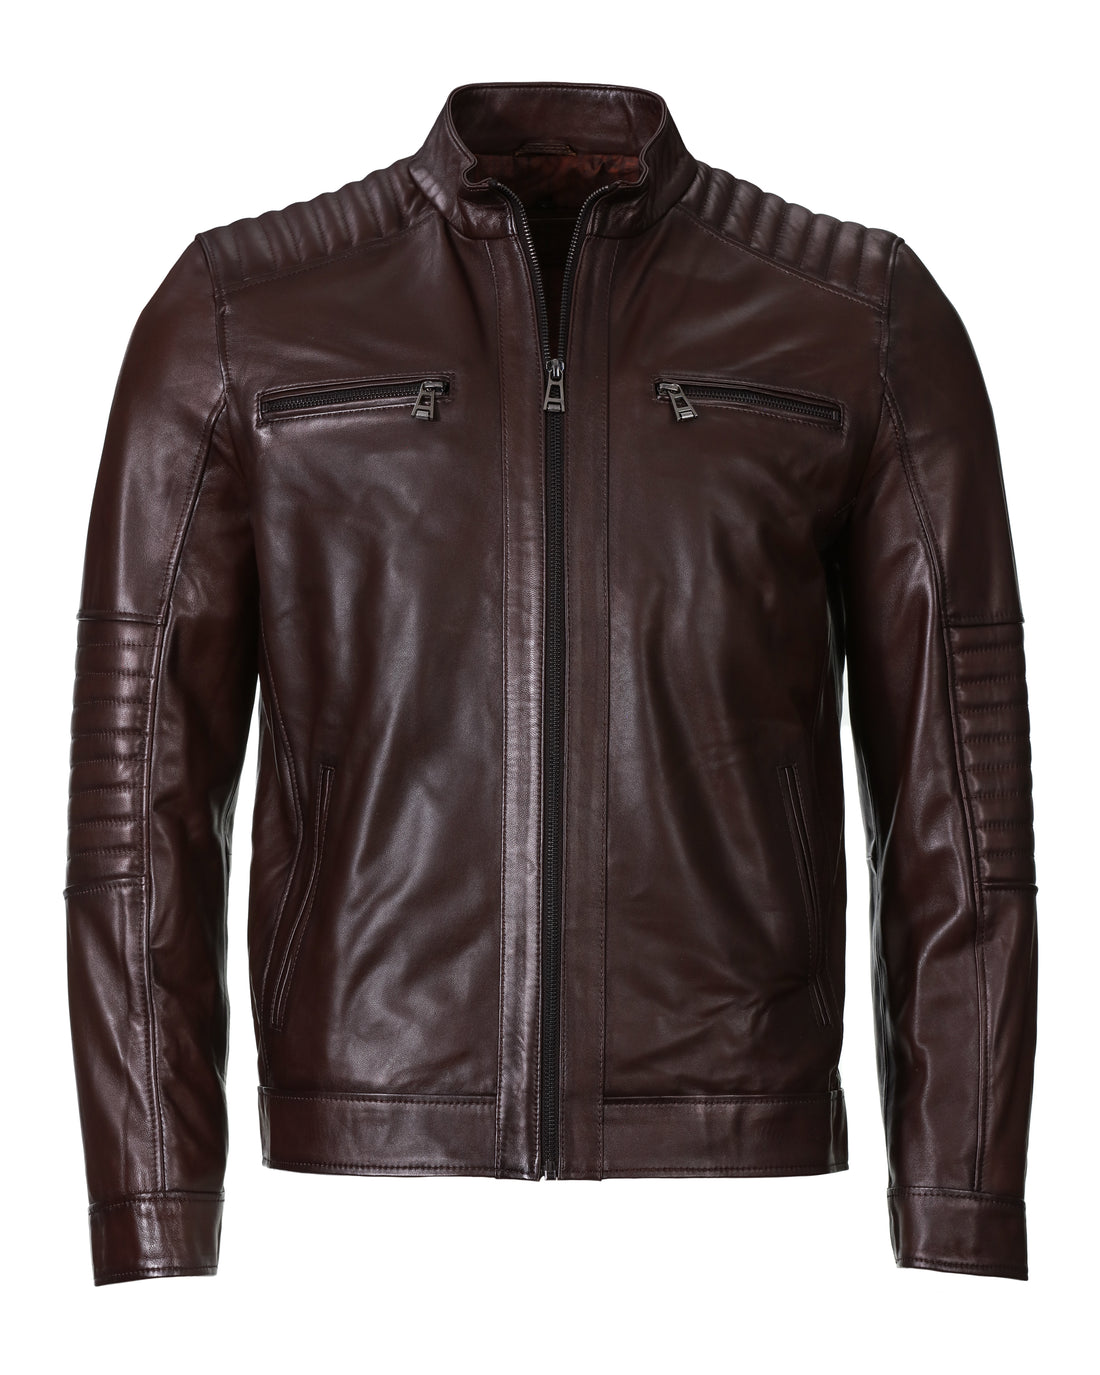 Lambskin Leather Jacket - Chocolate Brown - Leather Jacket by Urbbana